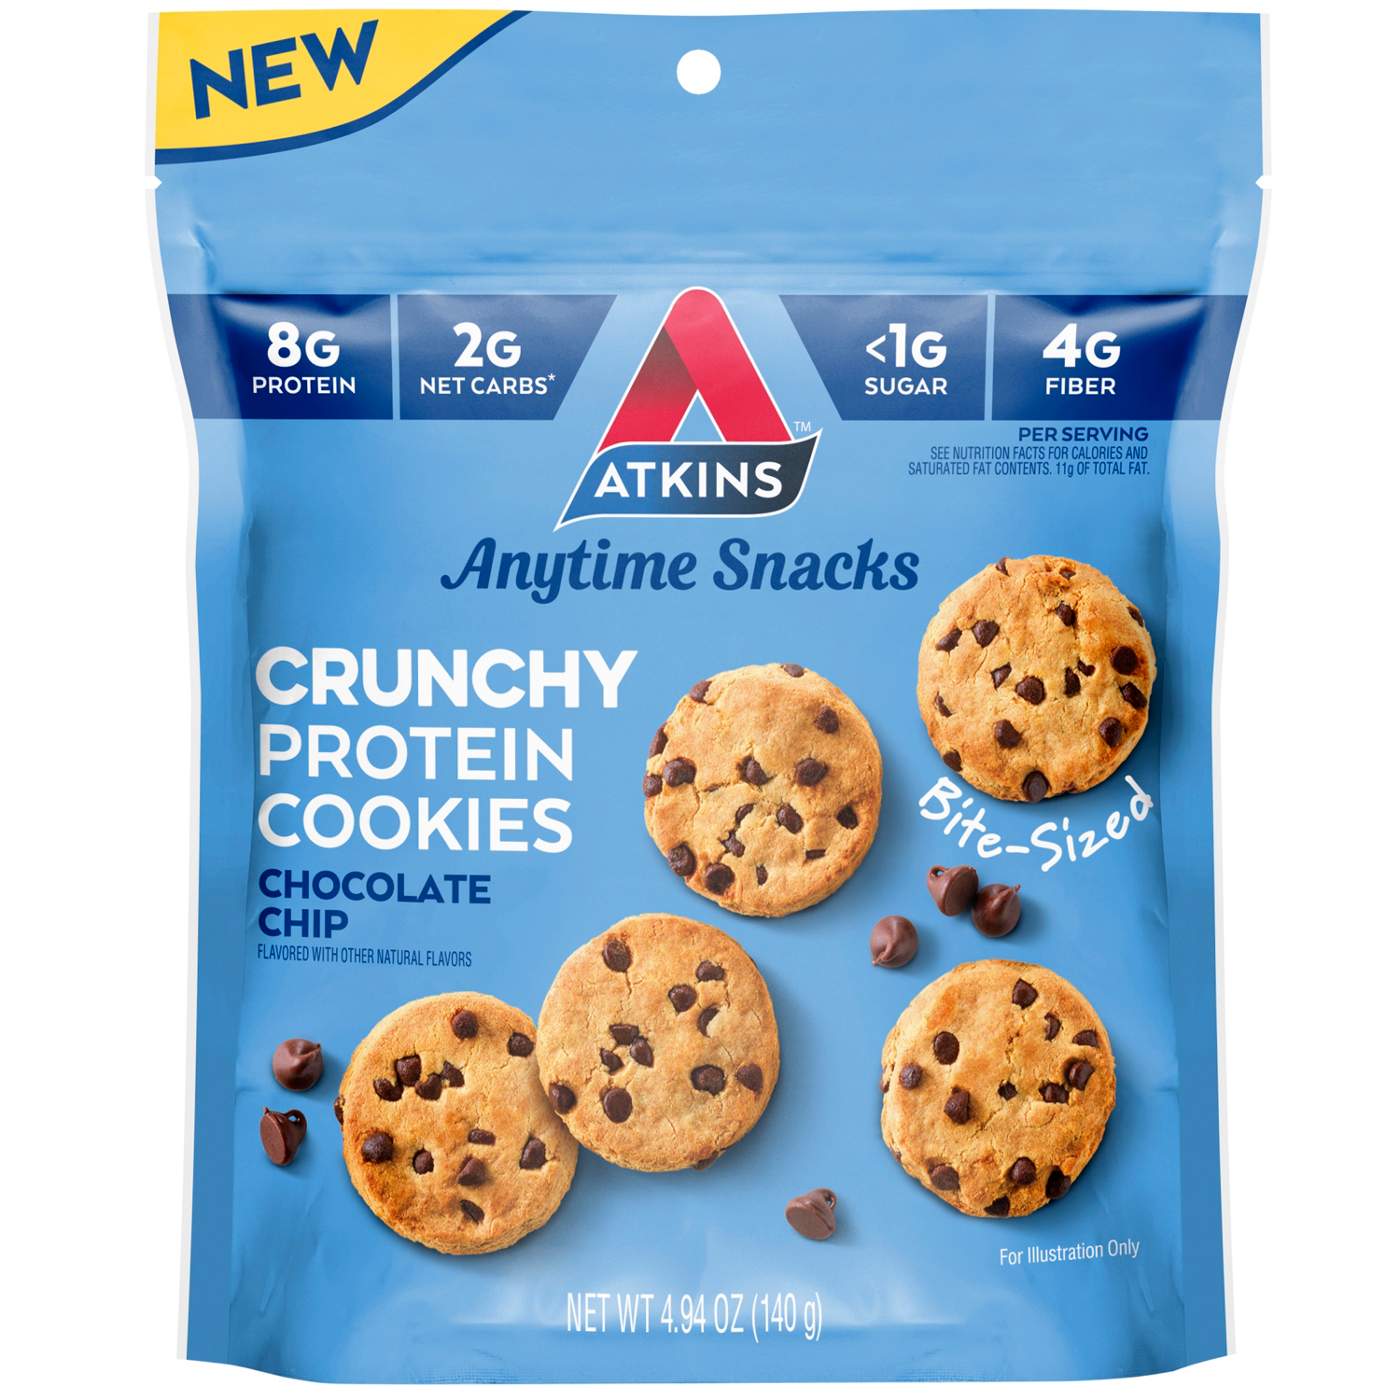 Atkins Crunchy Protein Cookies 8g - Chocolate Chip; image 1 of 2